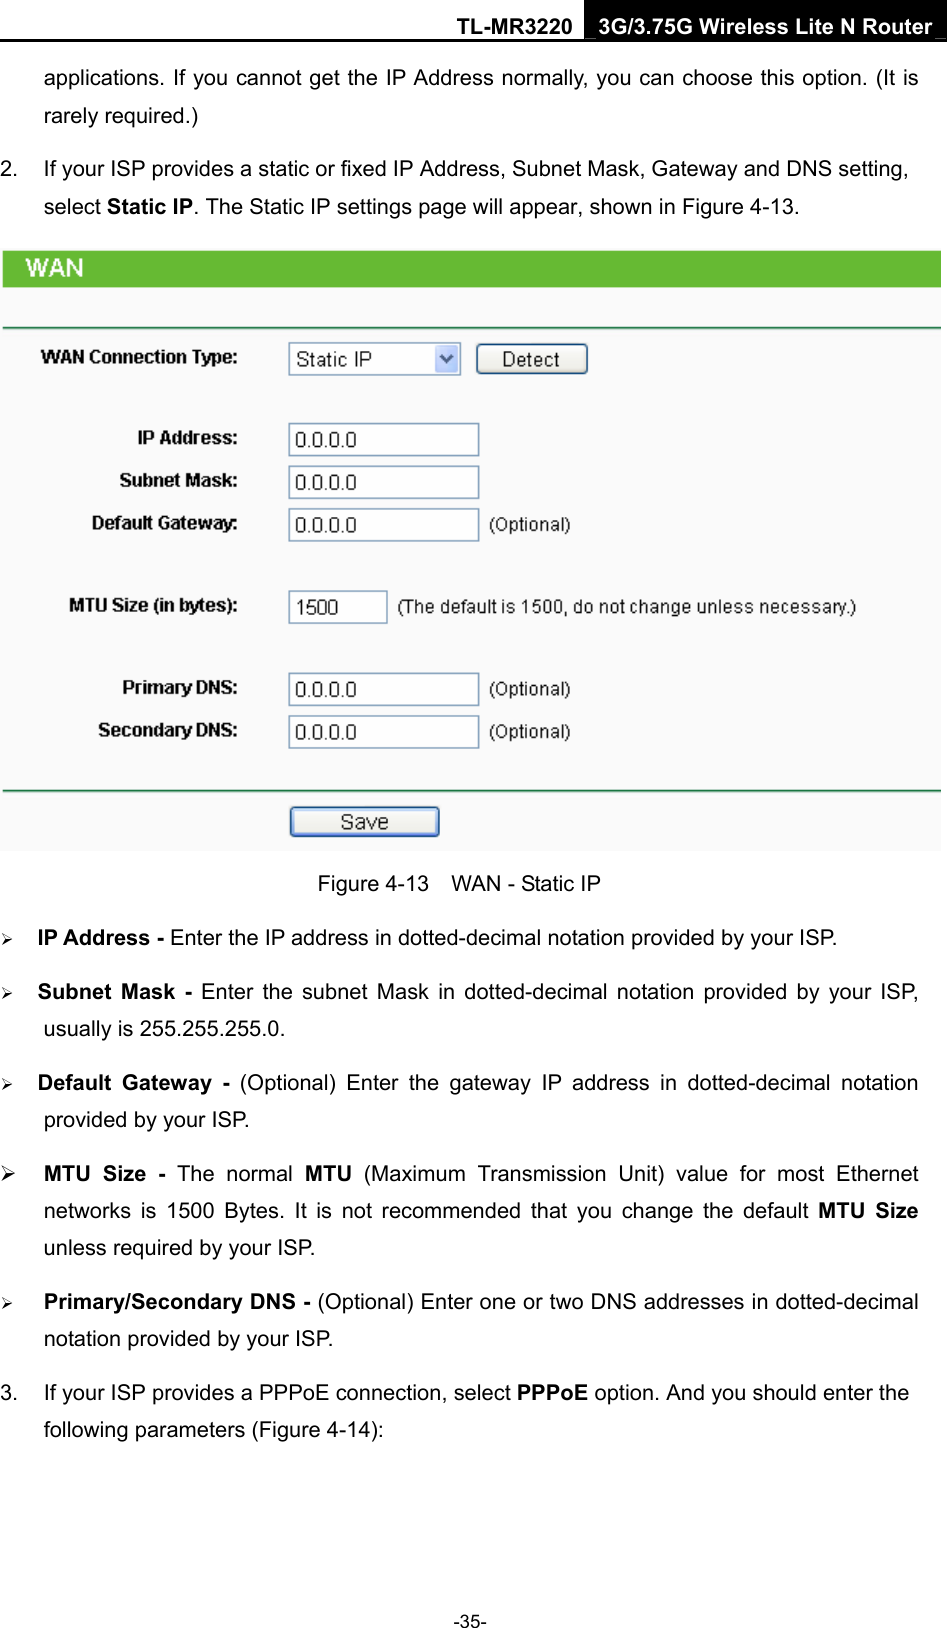 TL-MR3220 3G/3.75G Wireless Lite N Router -35- applications. If you cannot get the IP Address normally, you can choose this option. (It is rarely required.) 2.  If your ISP provides a static or fixed IP Address, Subnet Mask, Gateway and DNS setting, select Static IP. The Static IP settings page will appear, shown in Figure 4-13.  Figure 4-13    WAN - Static IP ¾ IP Address - Enter the IP address in dotted-decimal notation provided by your ISP. ¾ Subnet Mask - Enter the subnet Mask in dotted-decimal notation provided by your ISP, usually is 255.255.255.0. ¾ Default Gateway - (Optional) Enter the gateway IP address in dotted-decimal notation provided by your ISP. ¾ MTU Size - The normal MTU (Maximum Transmission Unit) value for most Ethernet networks is 1500 Bytes. It is not recommended that you change the default MTU Size unless required by your ISP. ¾ Primary/Secondary DNS - (Optional) Enter one or two DNS addresses in dotted-decimal notation provided by your ISP. 3.  If your ISP provides a PPPoE connection, select PPPoE option. And you should enter the following parameters (Figure 4-14): 